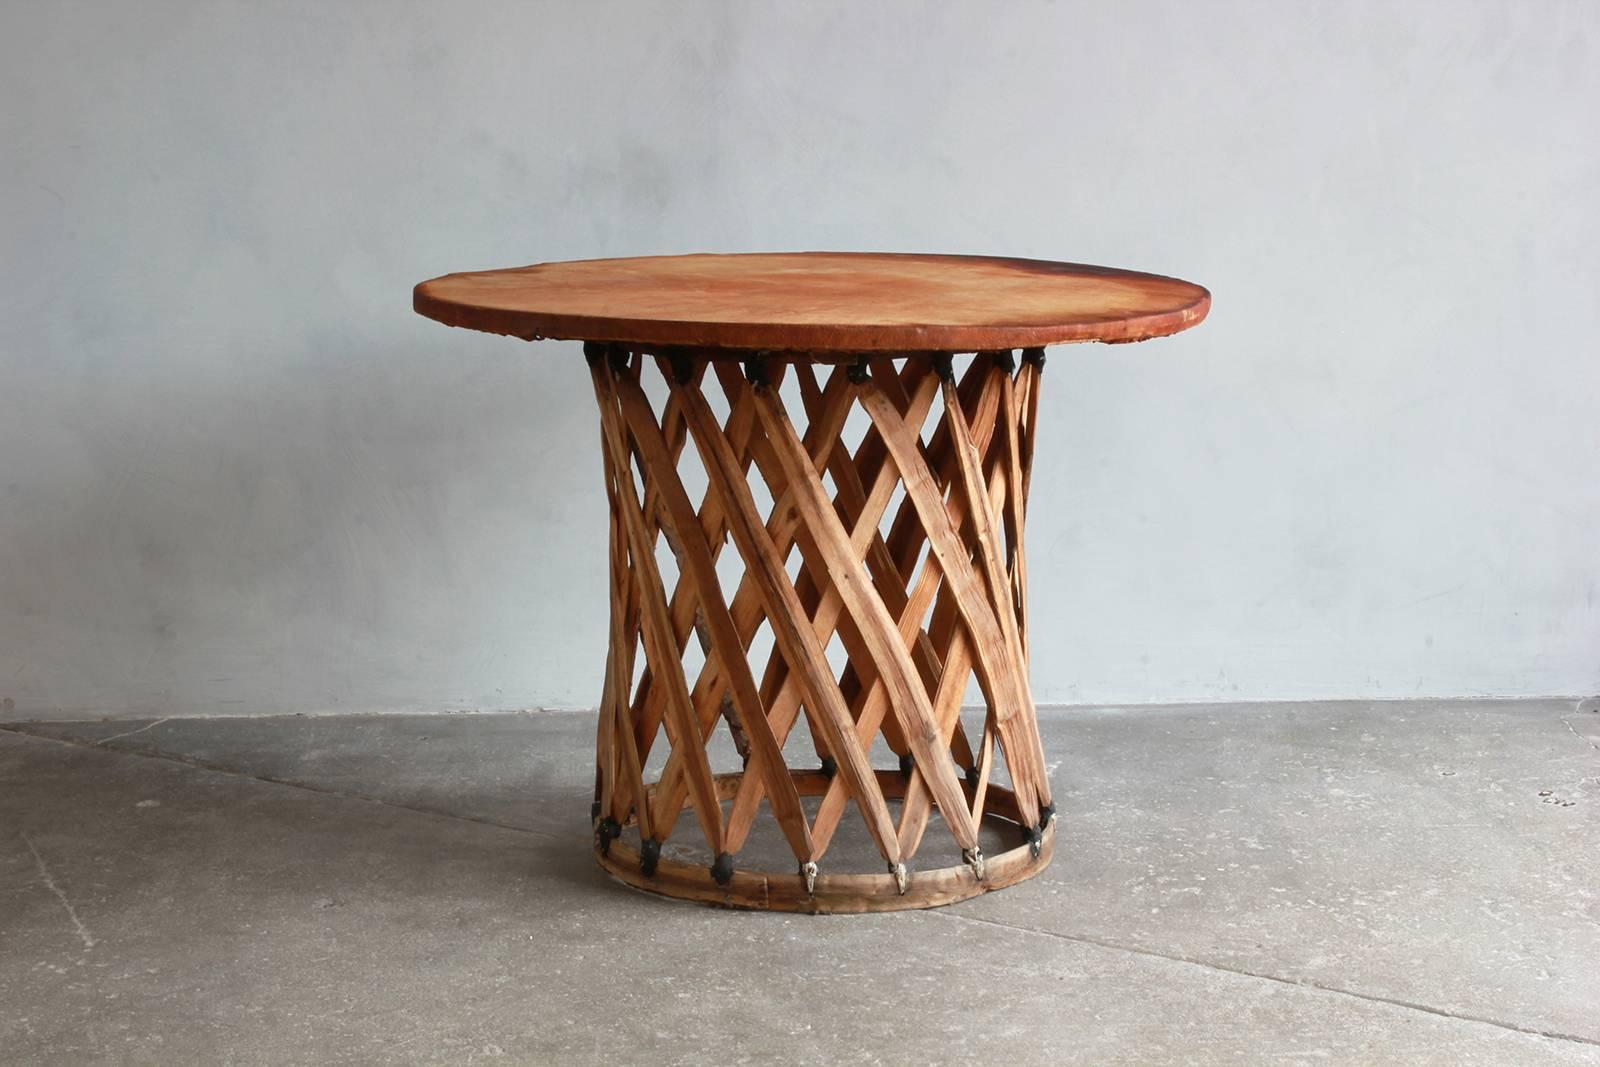 Mexican leather wrapped round table with four Equipale chairs. Chair dimensions are: 24.5